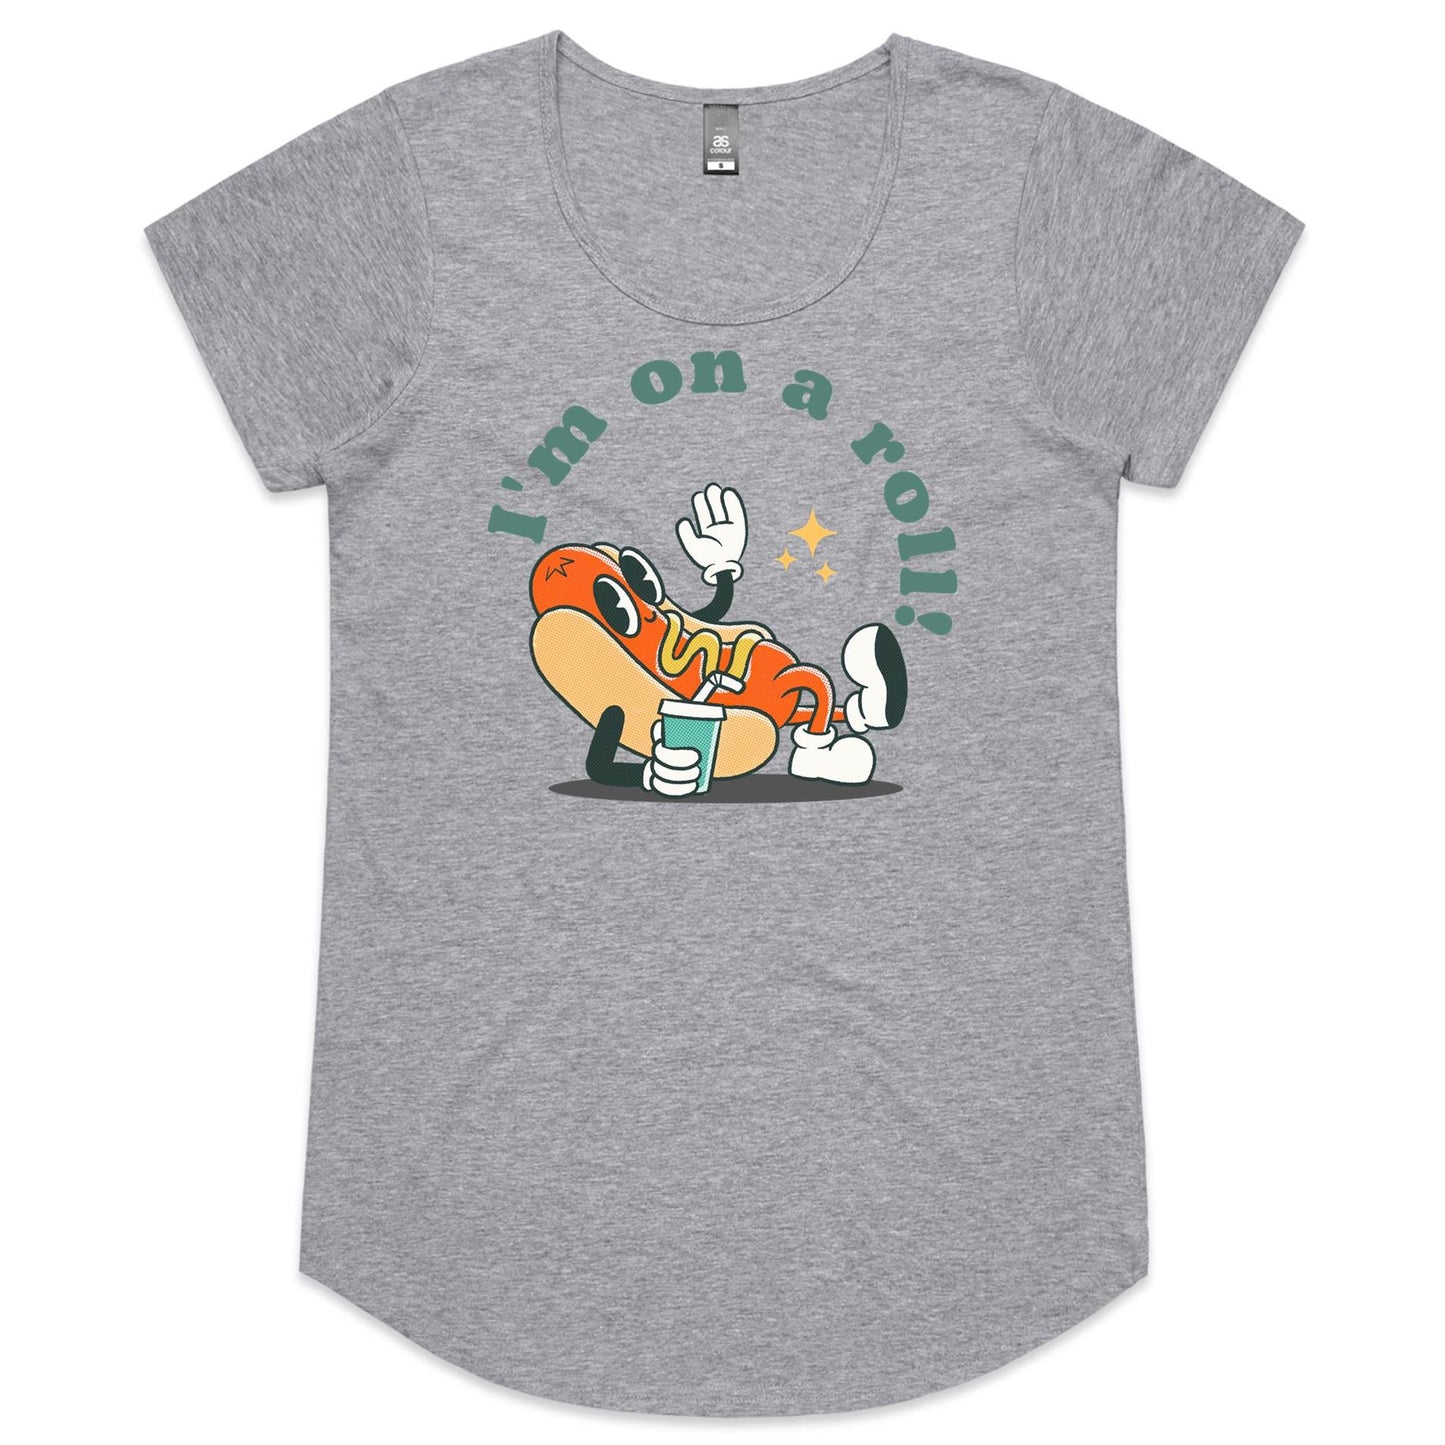 Hot Dog, I'm On A Roll - Womens Scoop Neck T-Shirt Grey Marle Womens Scoop Neck T-shirt Food